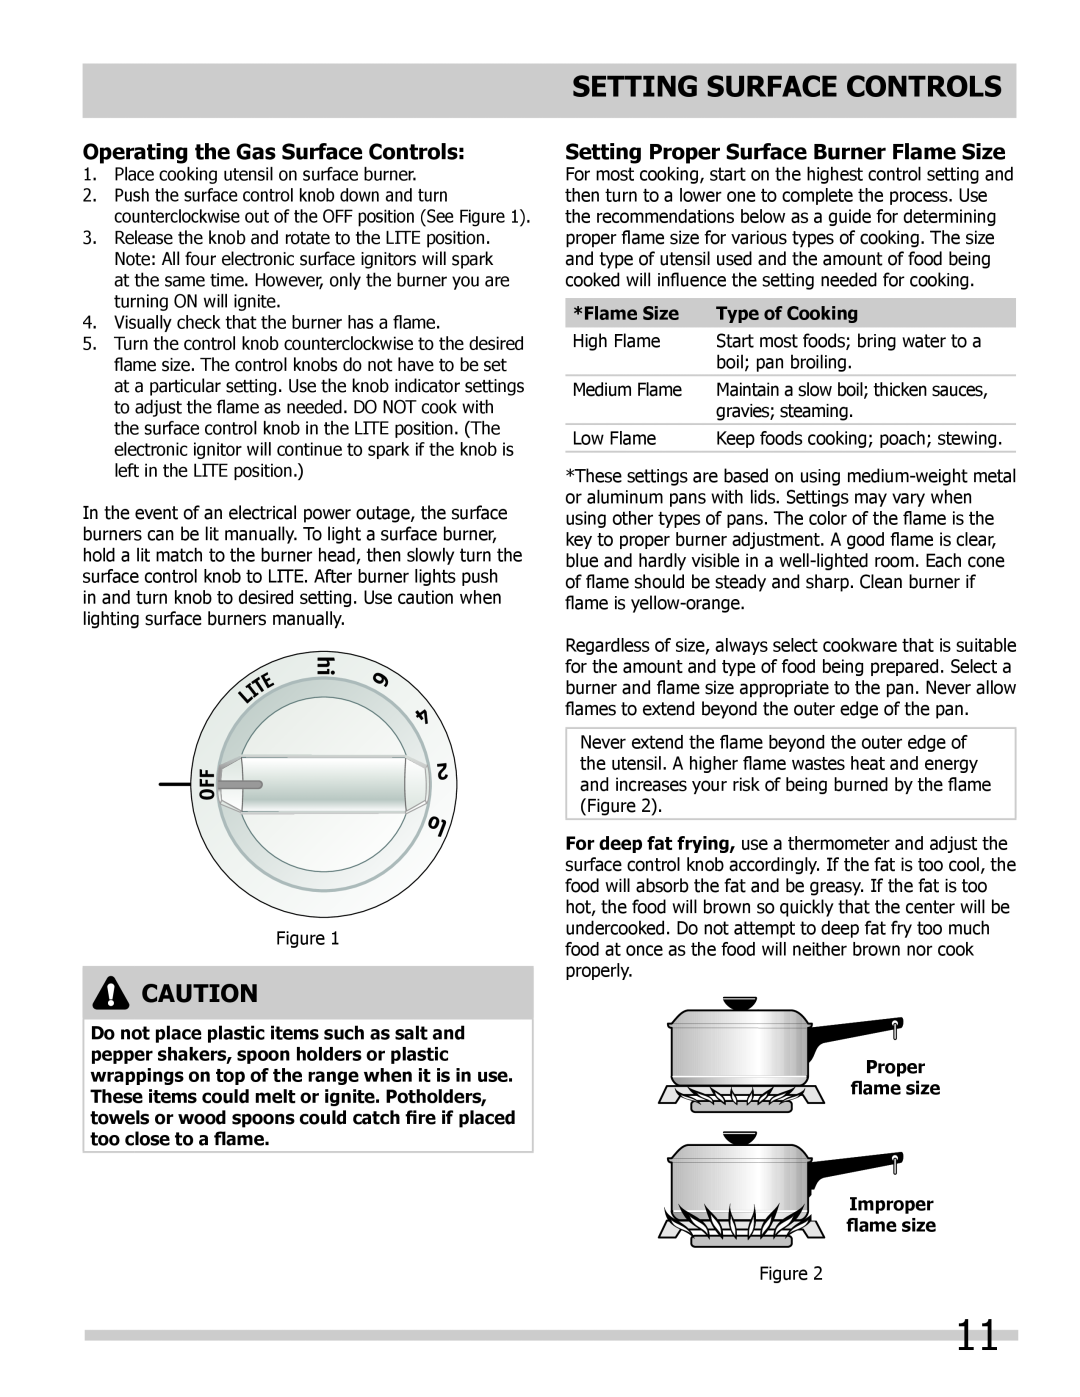 Frigidaire FPDF4085KF Operating the Gas Surface Controls, Setting Proper Surface Burner Flame Size, Wrong 